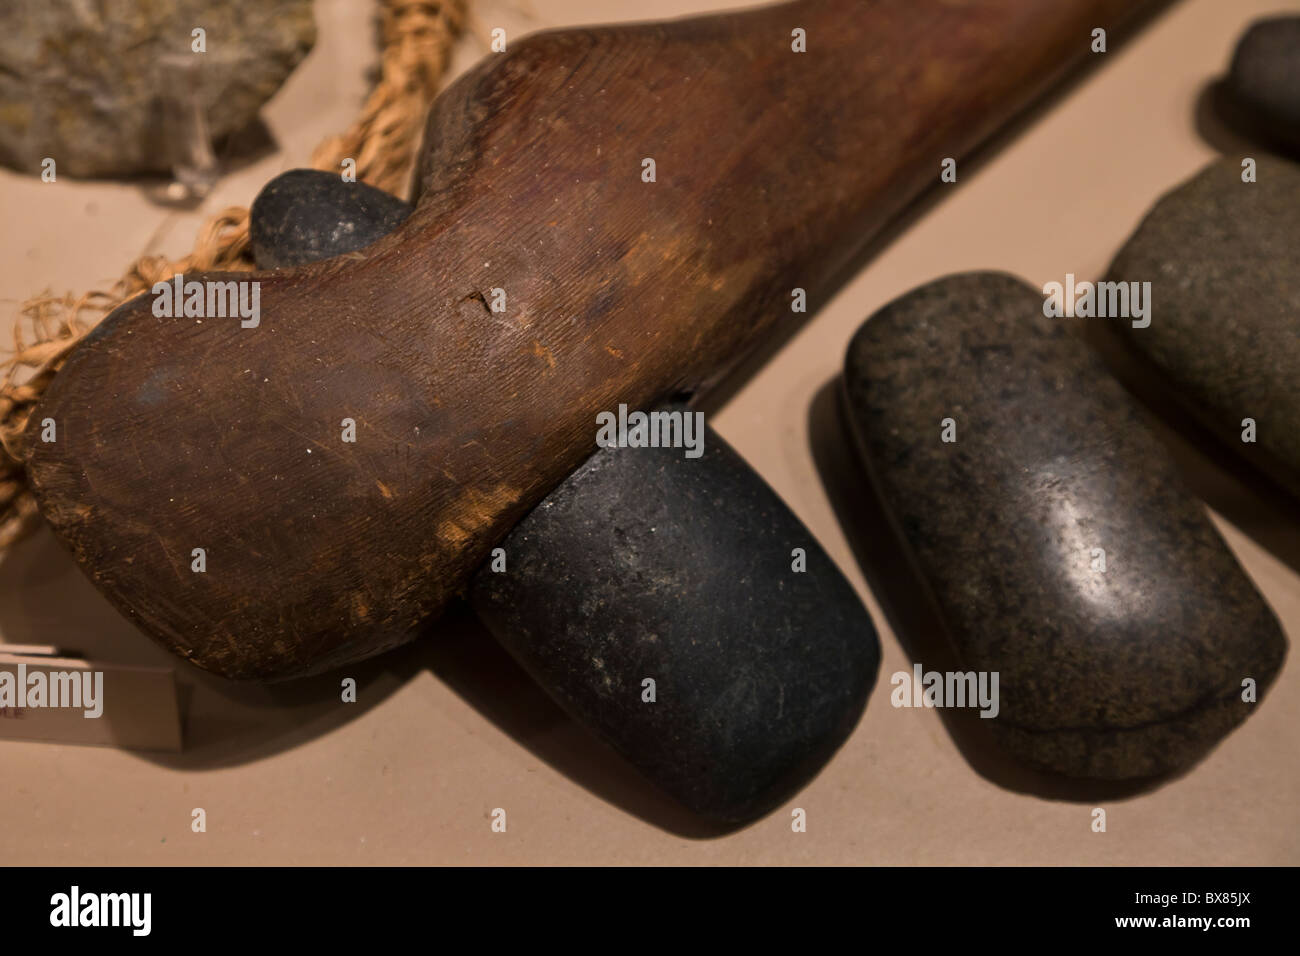 Mississippian period Axe Heads or Celts found at Cahokia Mounds State Historic Site, Illinois, USA. Stock Photo